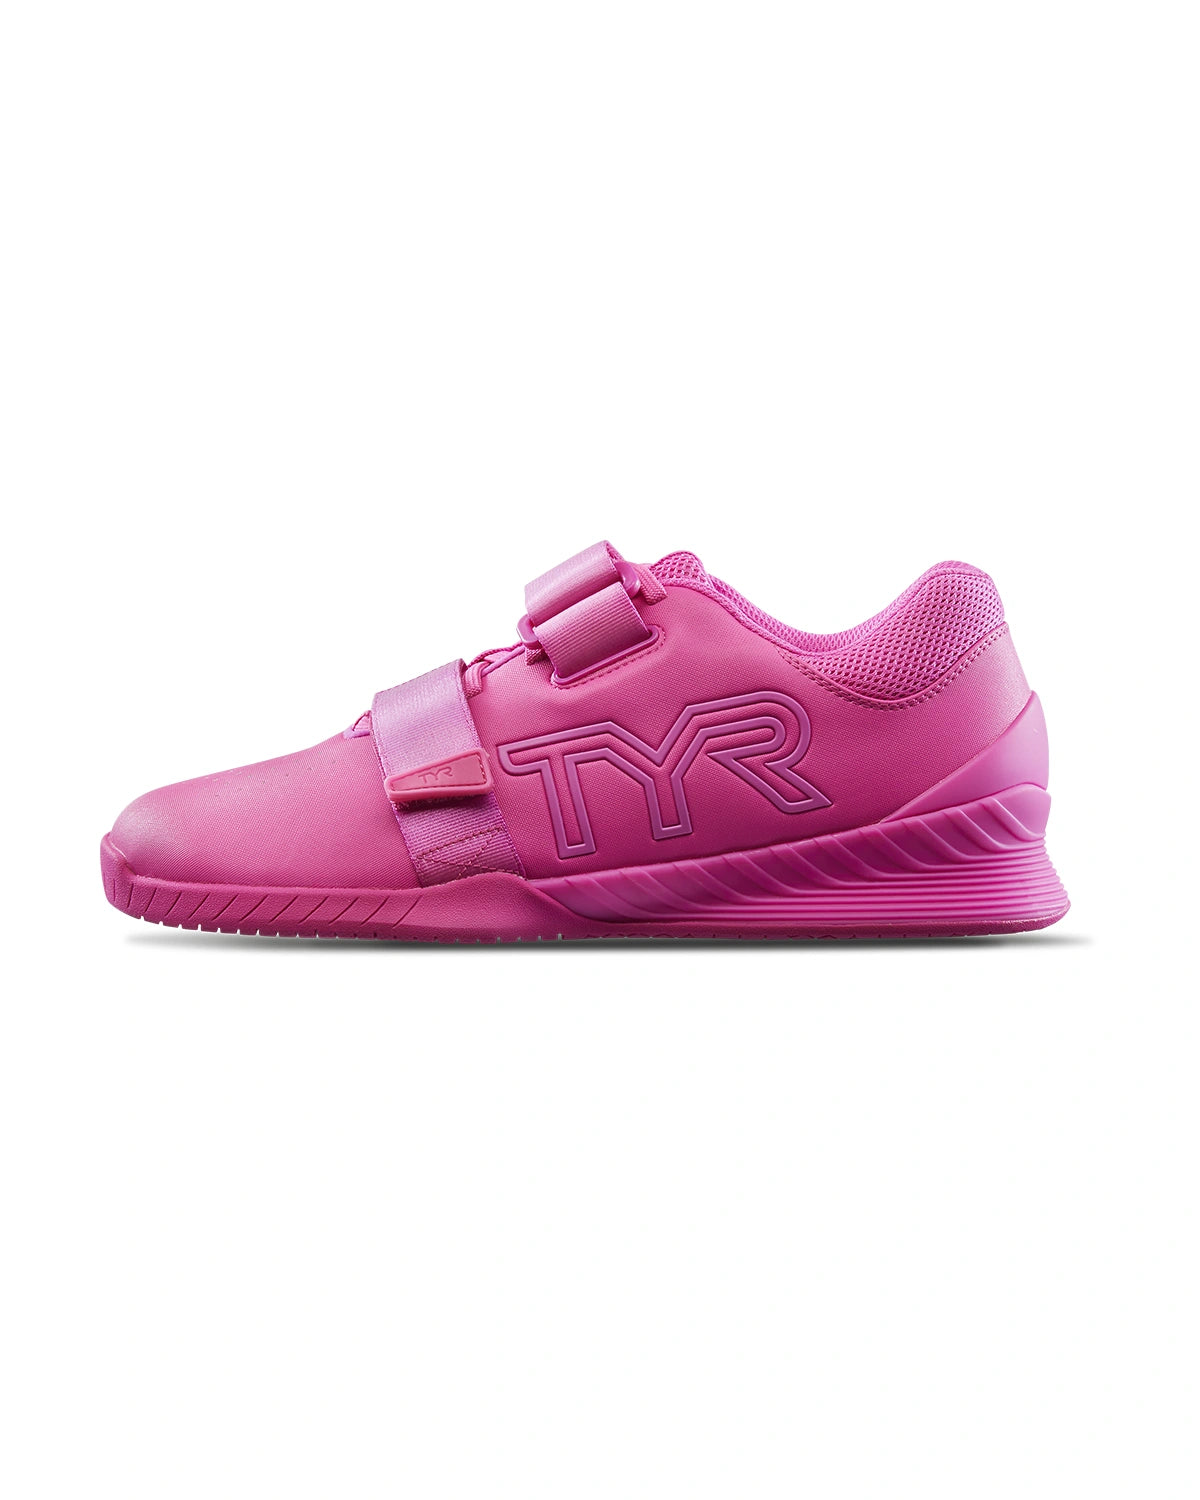 TYR L1 Lifter Weightlifting Shoe Pink